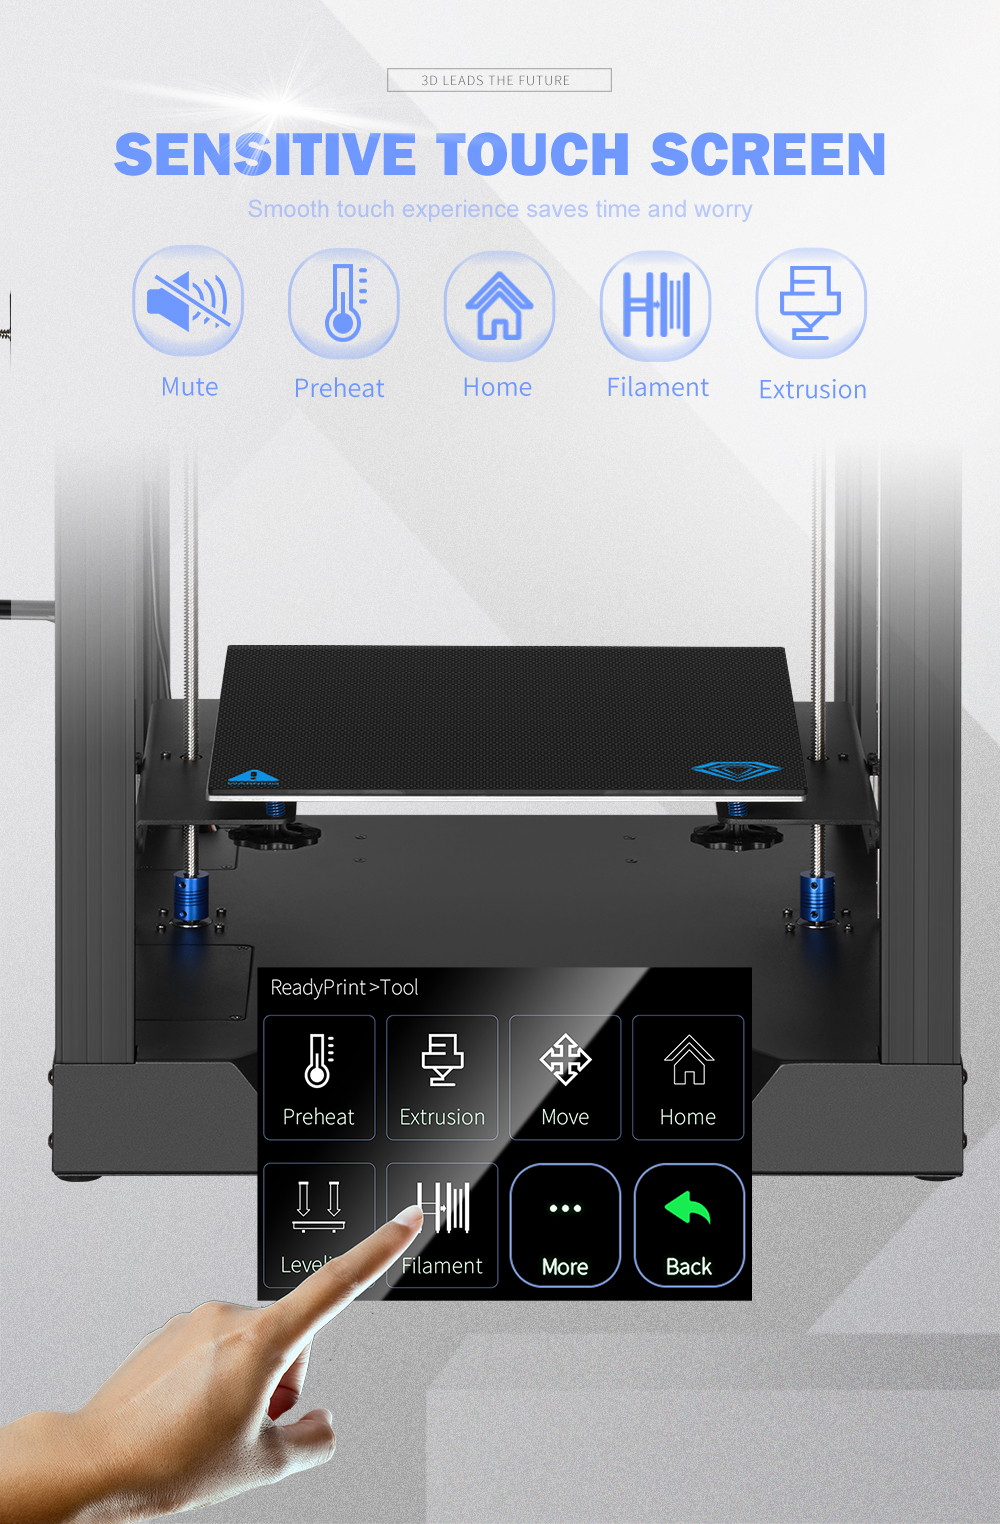 TWO-TREESreg-SP-5-Core-XY-300300350mm-Printing-Size-3D-Printer-With-Full-Metal-BodyDouble-Linear-Gui-1630366-5